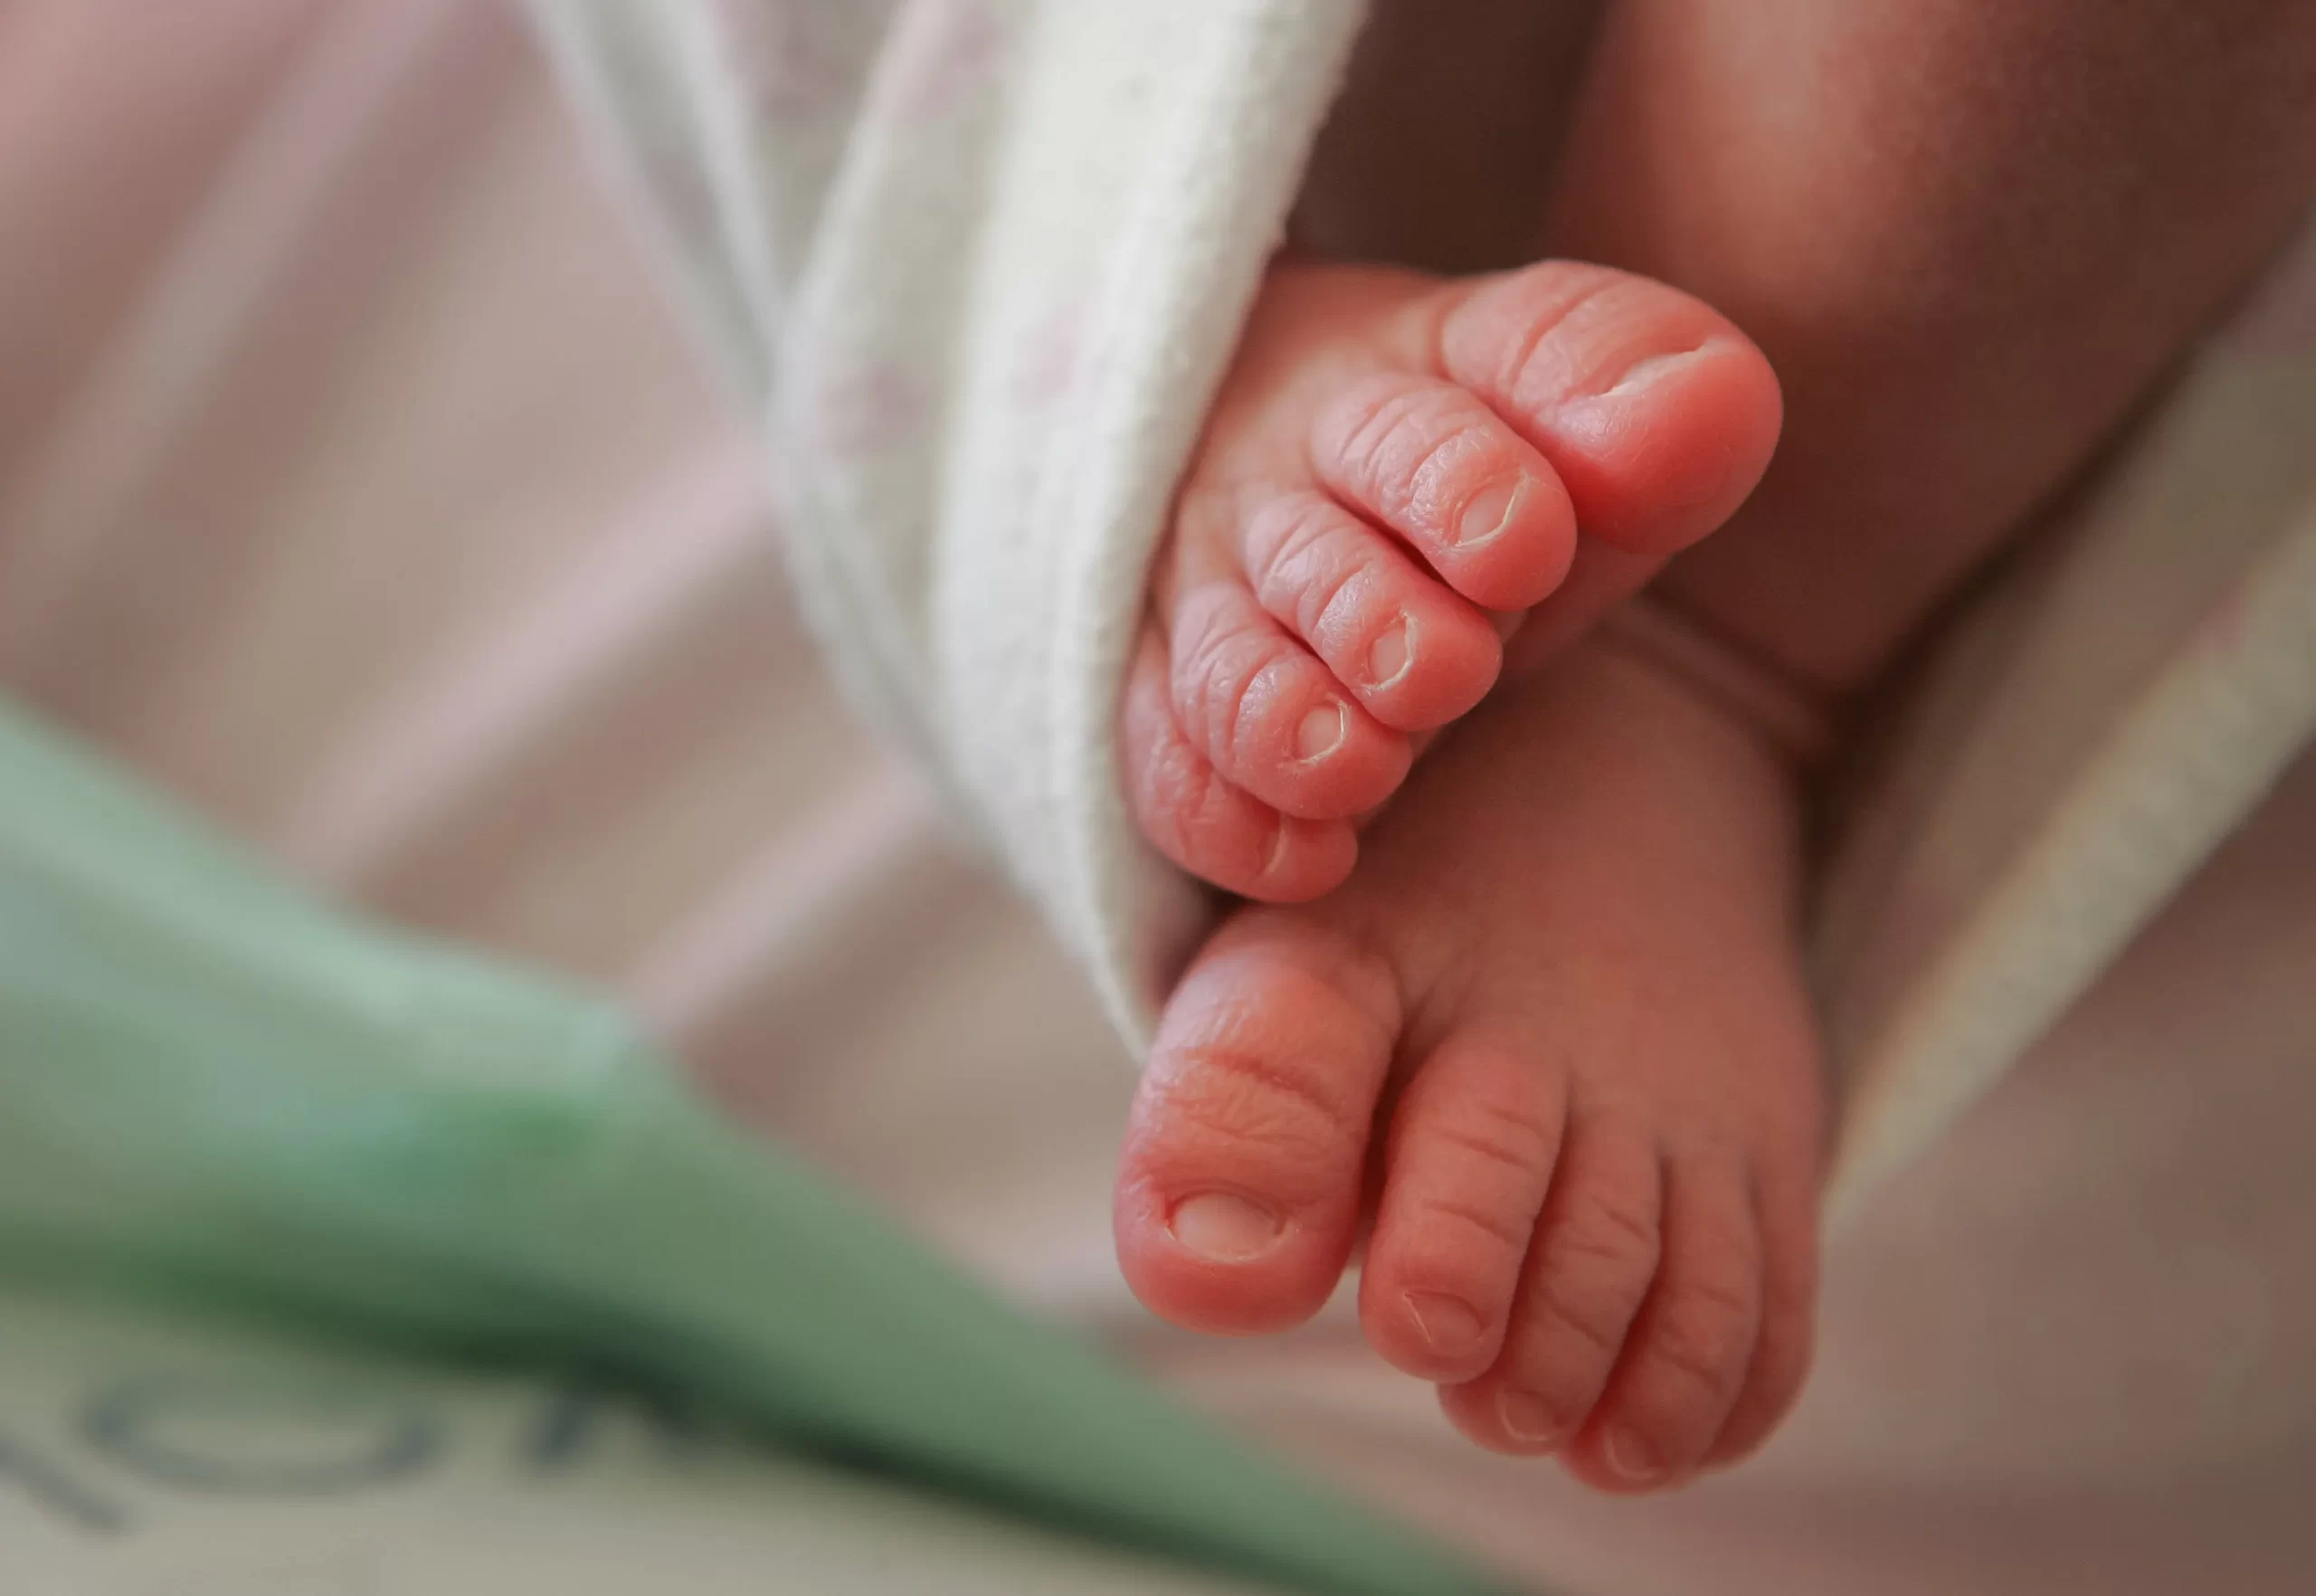 The Most Common Penis Birth Defects